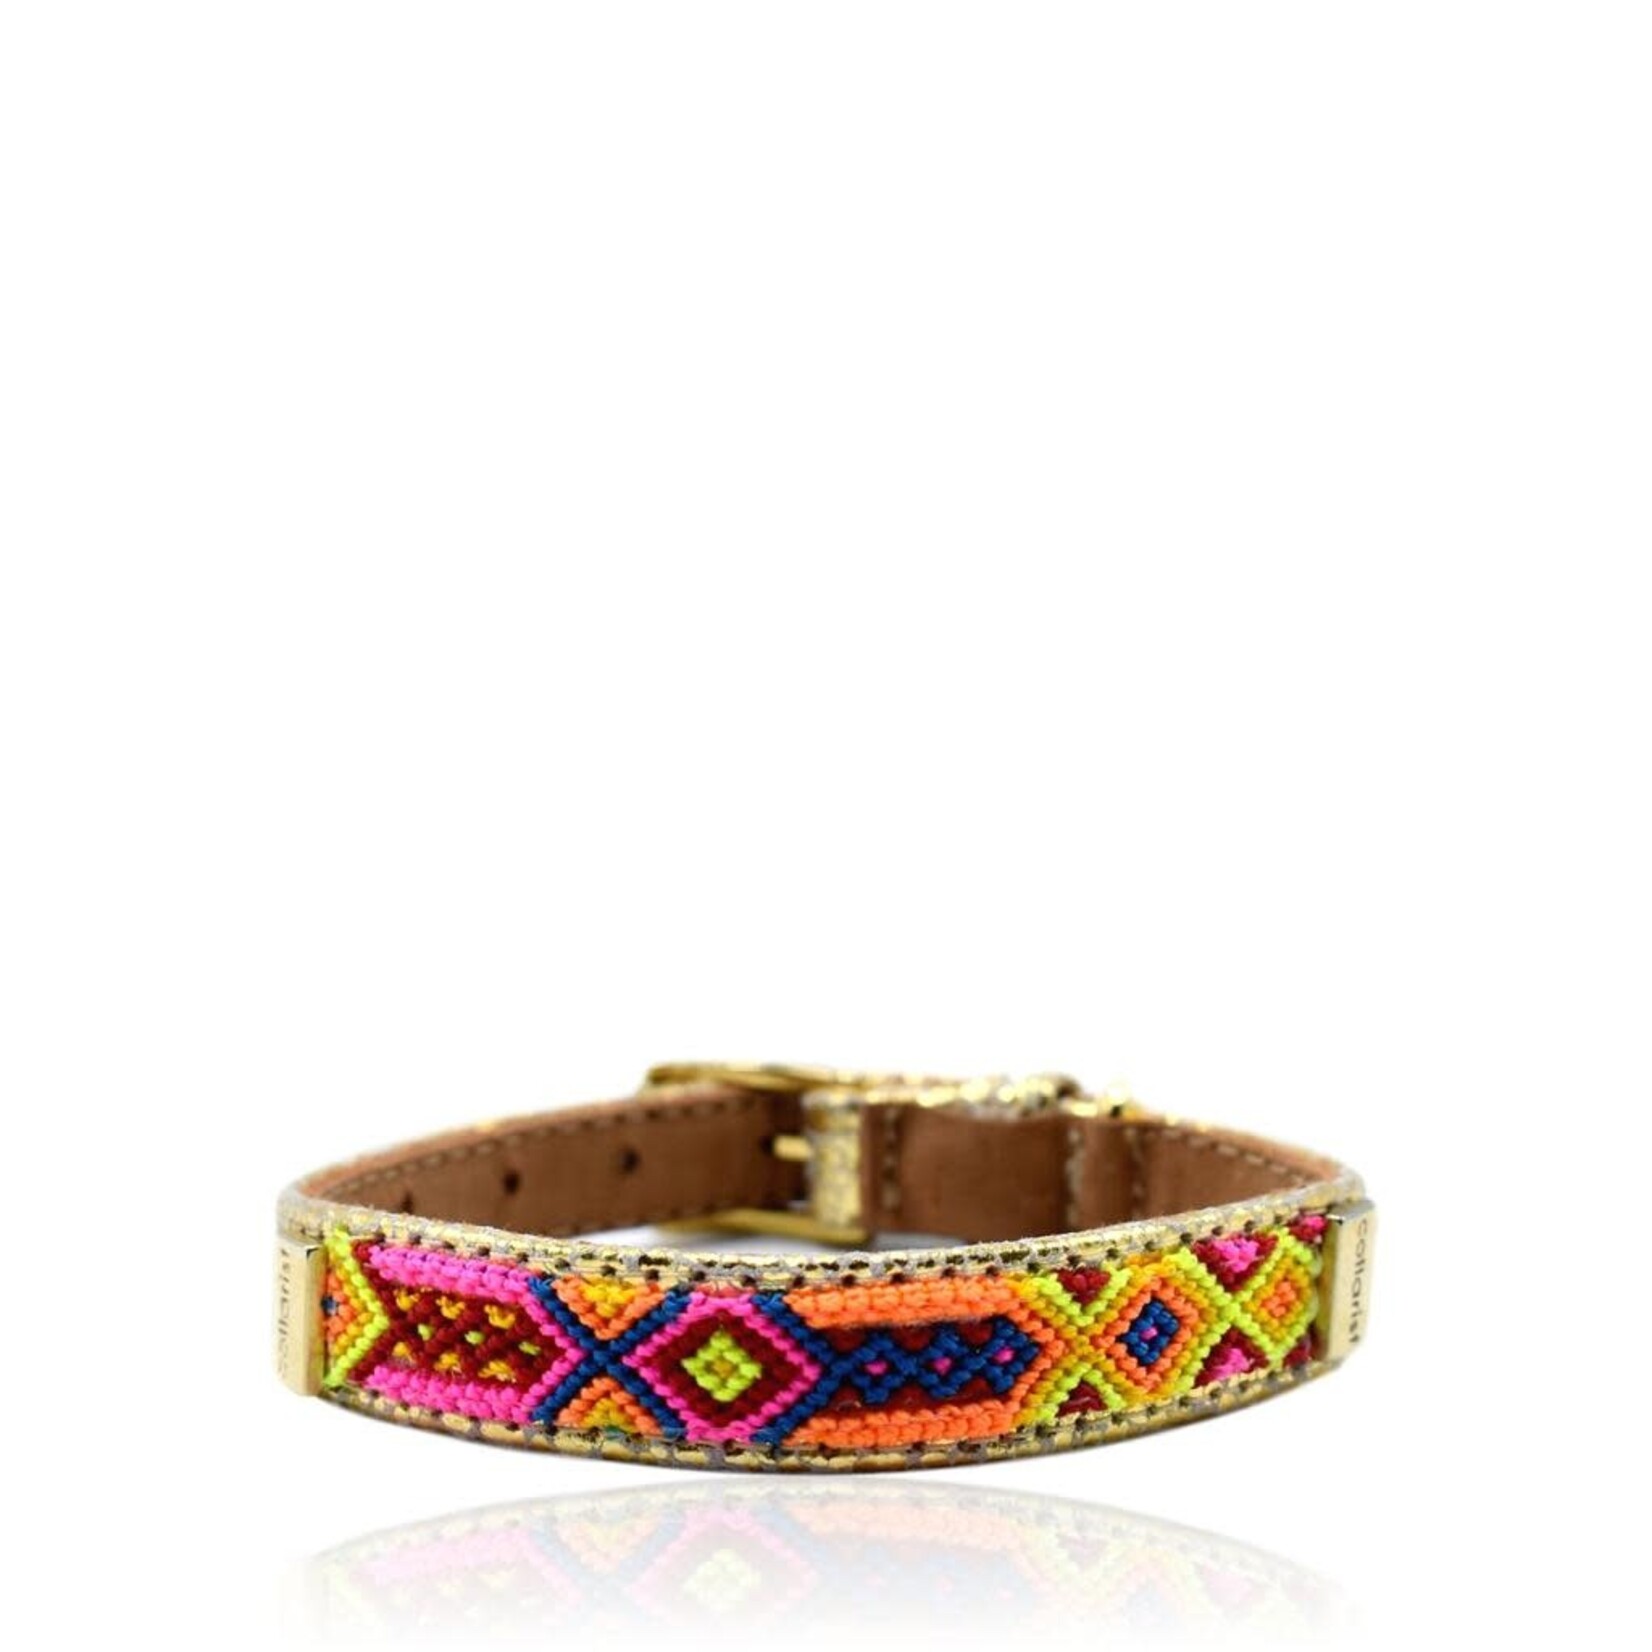 Collarist Woven & Gold Leather Friendship Collar "Get Happy"